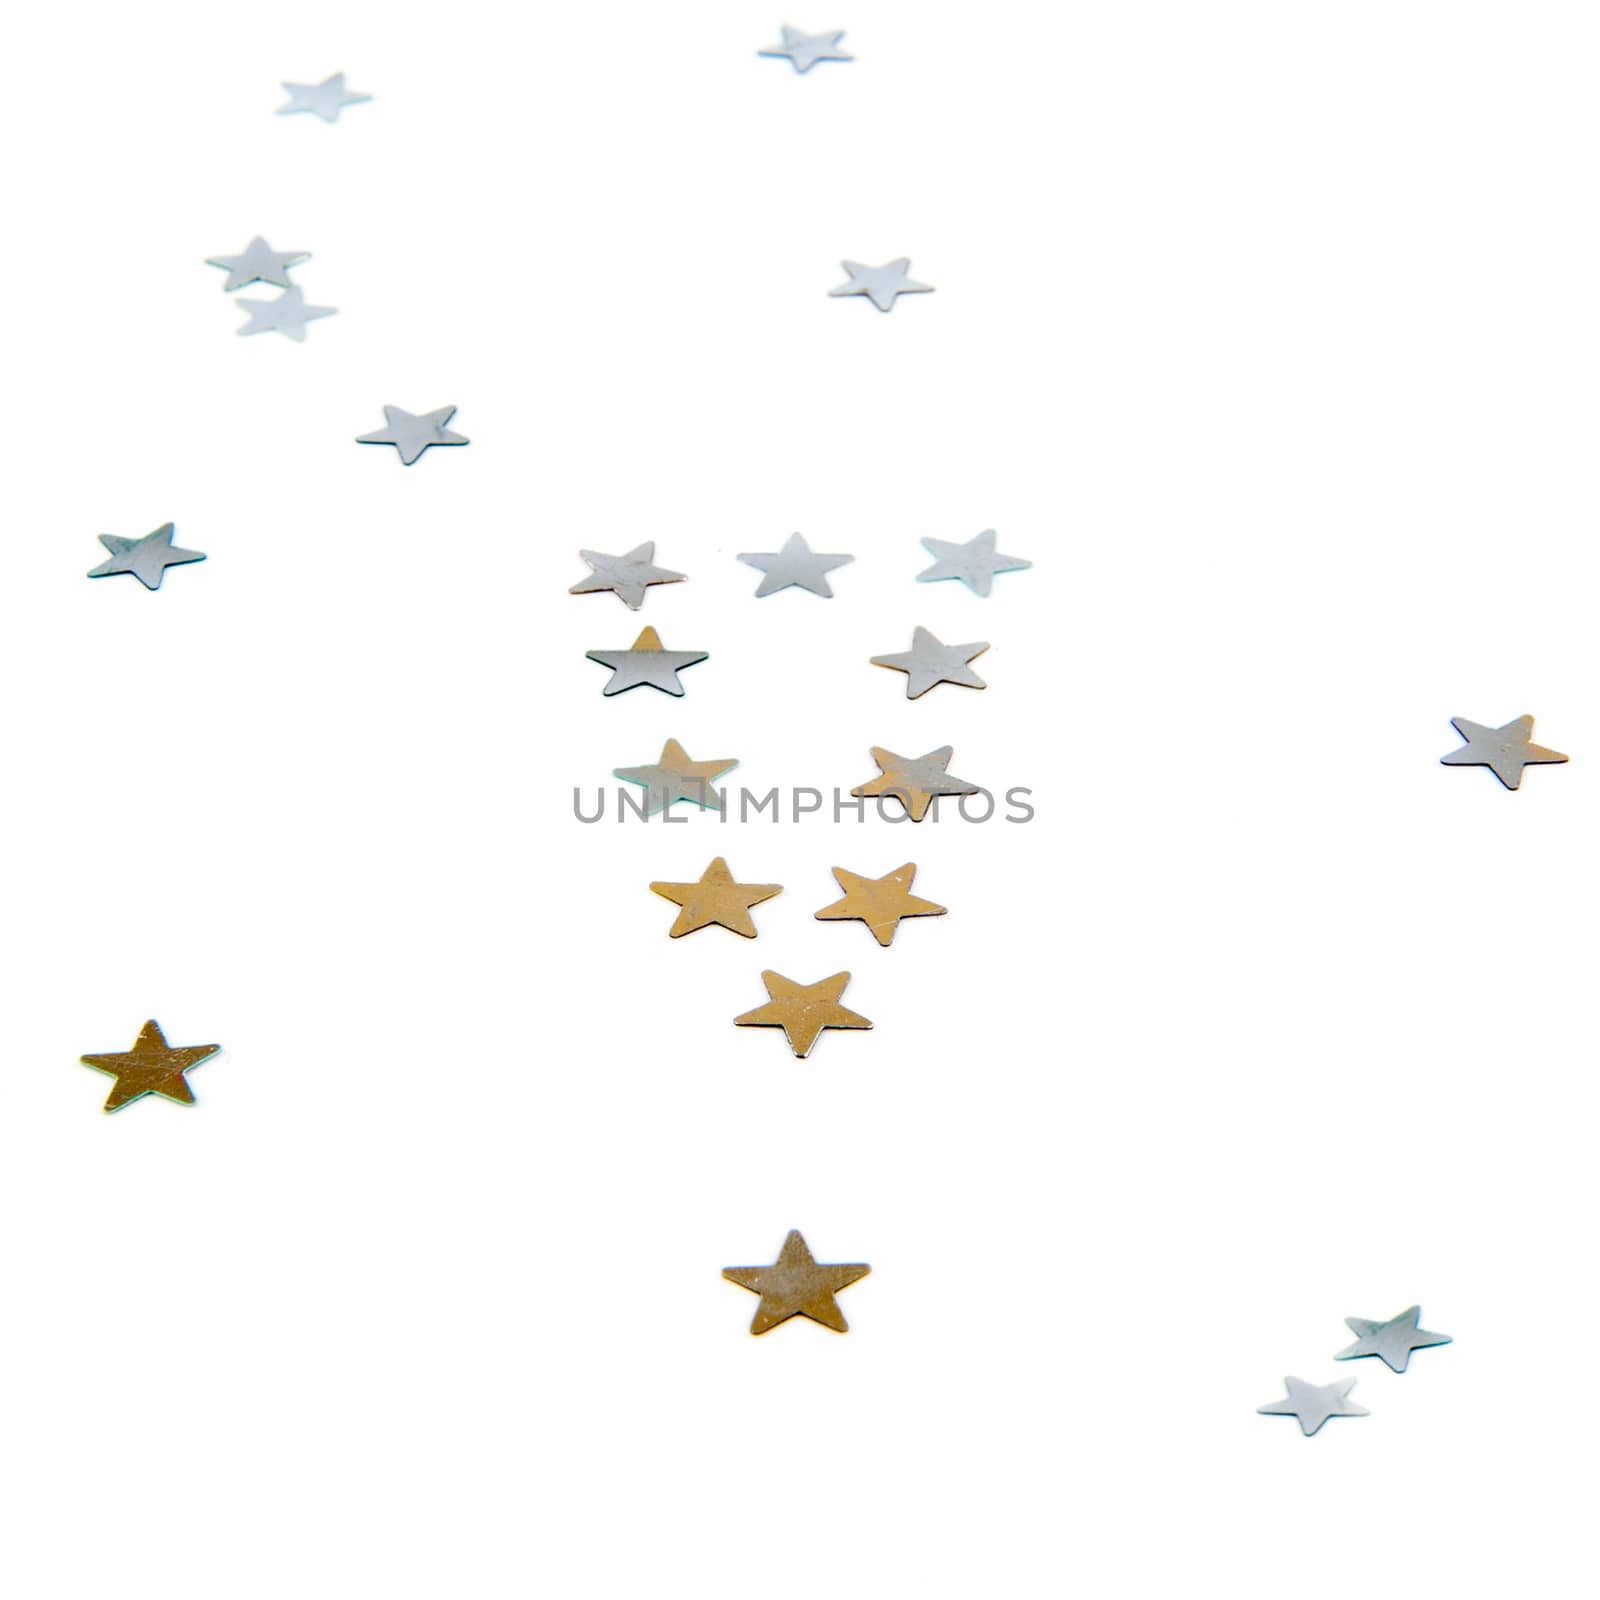 a gold and silver exclamation mark, made of stars on a white background